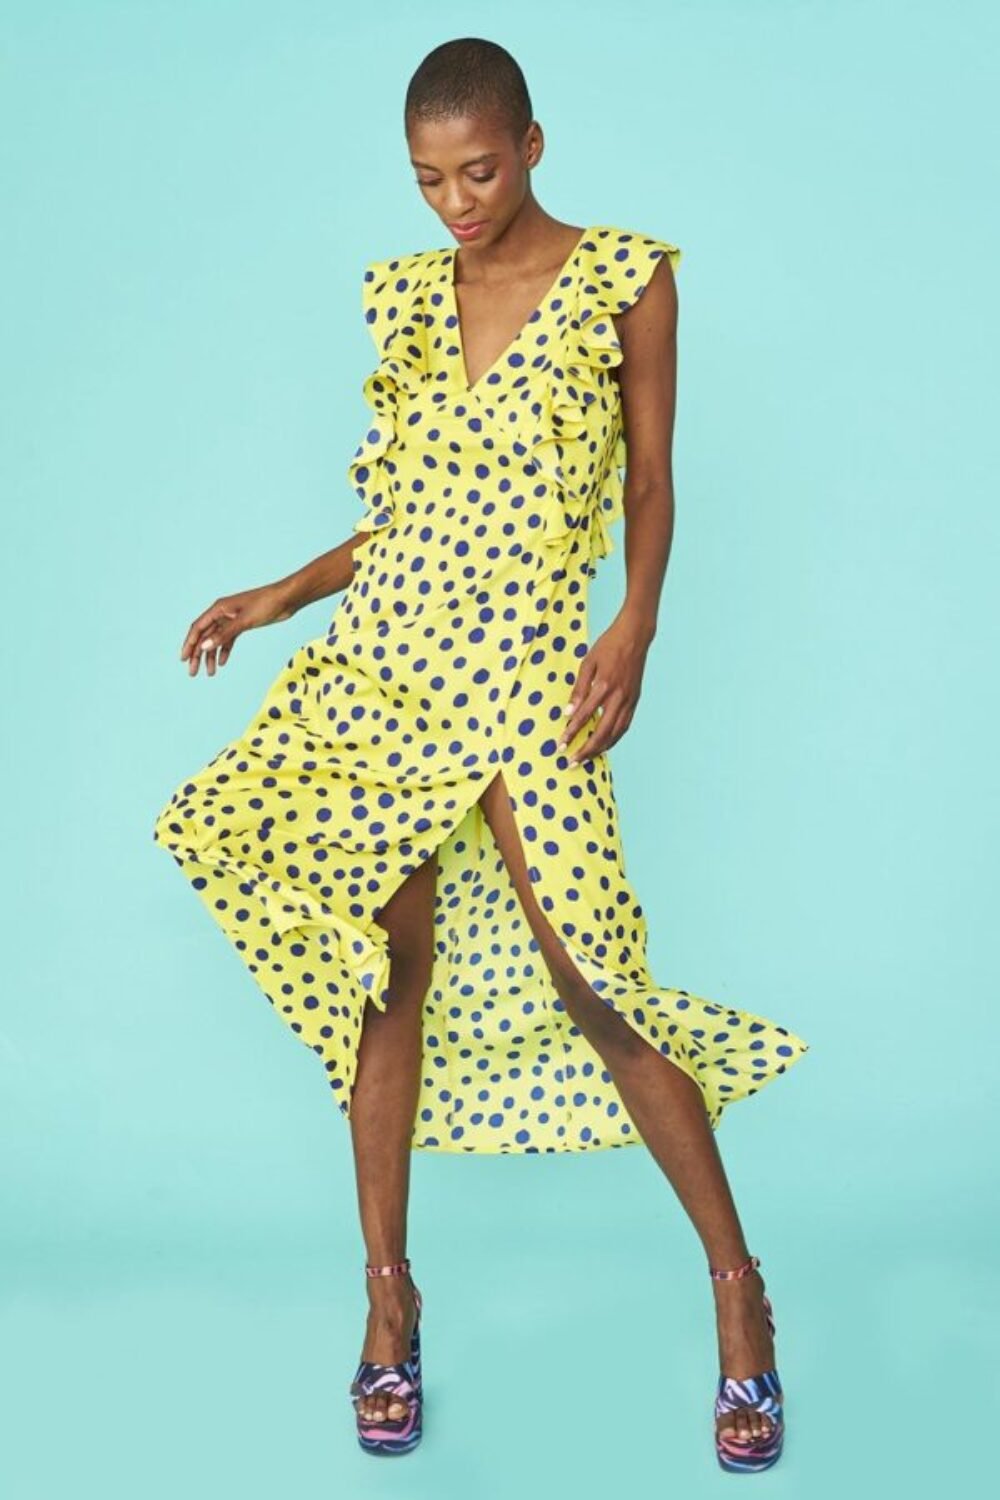 Shop Lux Rayon Polka Dot Ruffled Mid Parma Dress and women's luxury and designer clothes at www.lux-apparel.co.uk